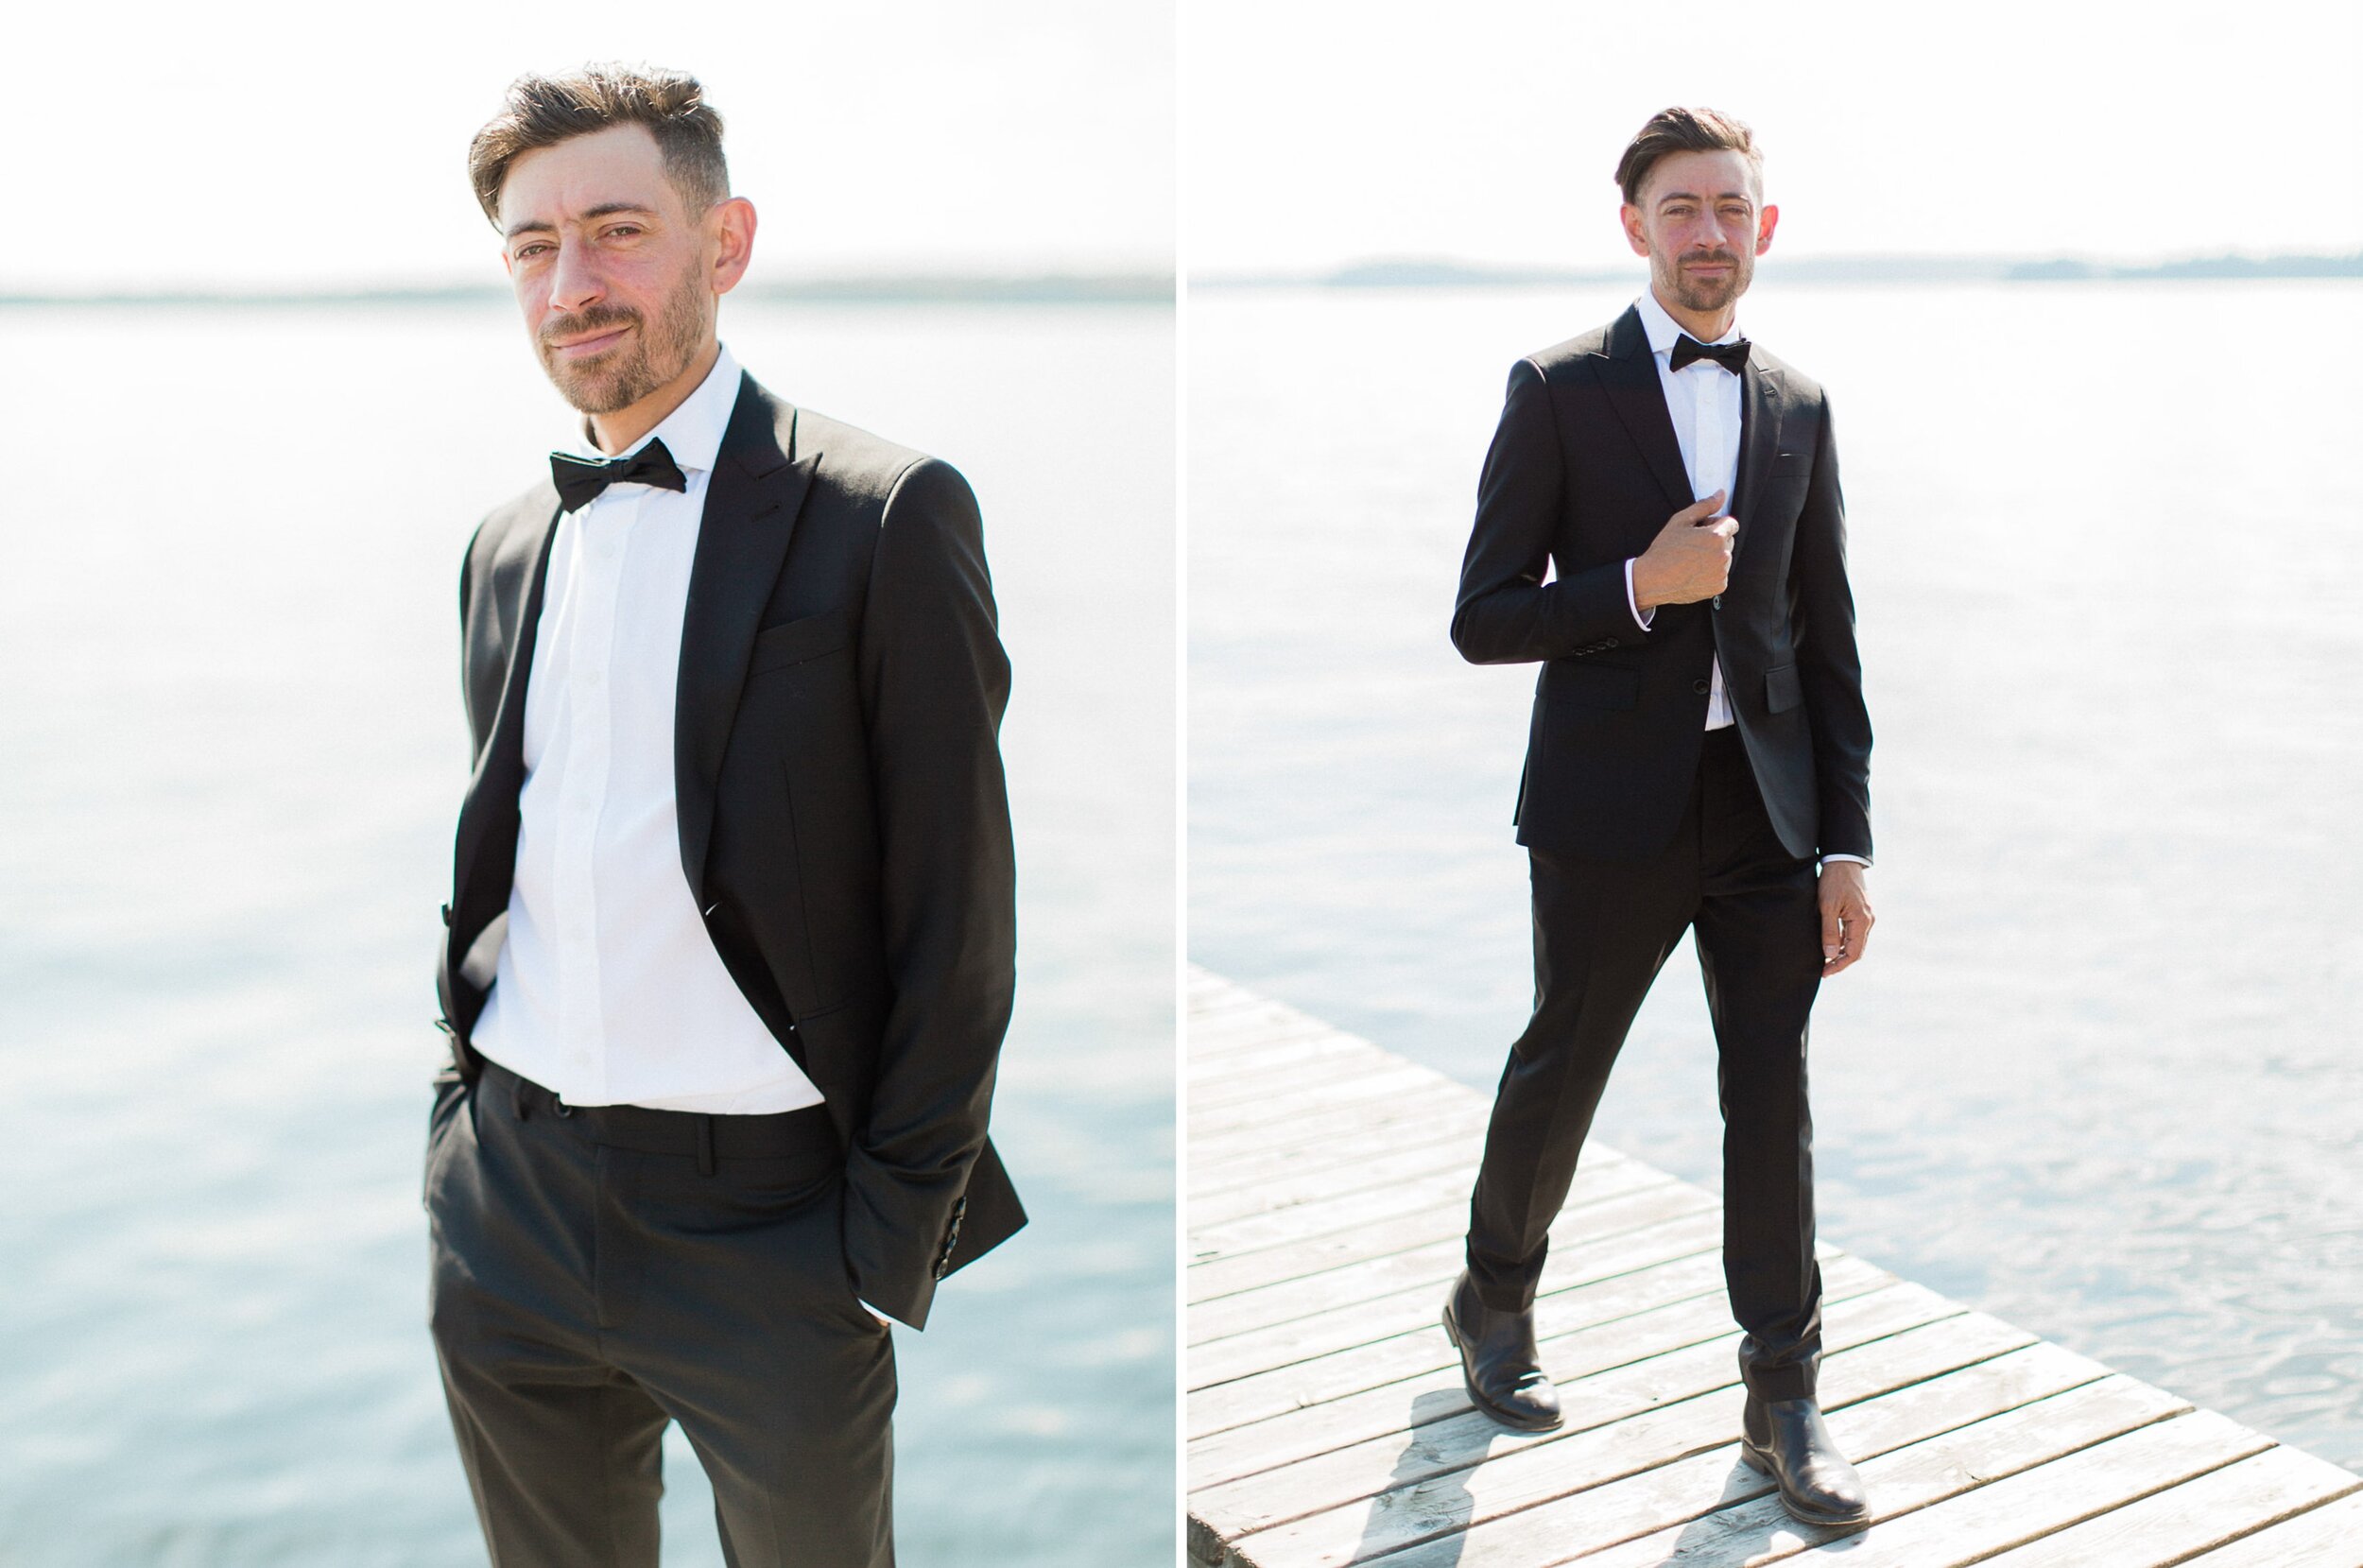 groom posing naturally for a candid happy photo on his wedding day at windermere house muskoka